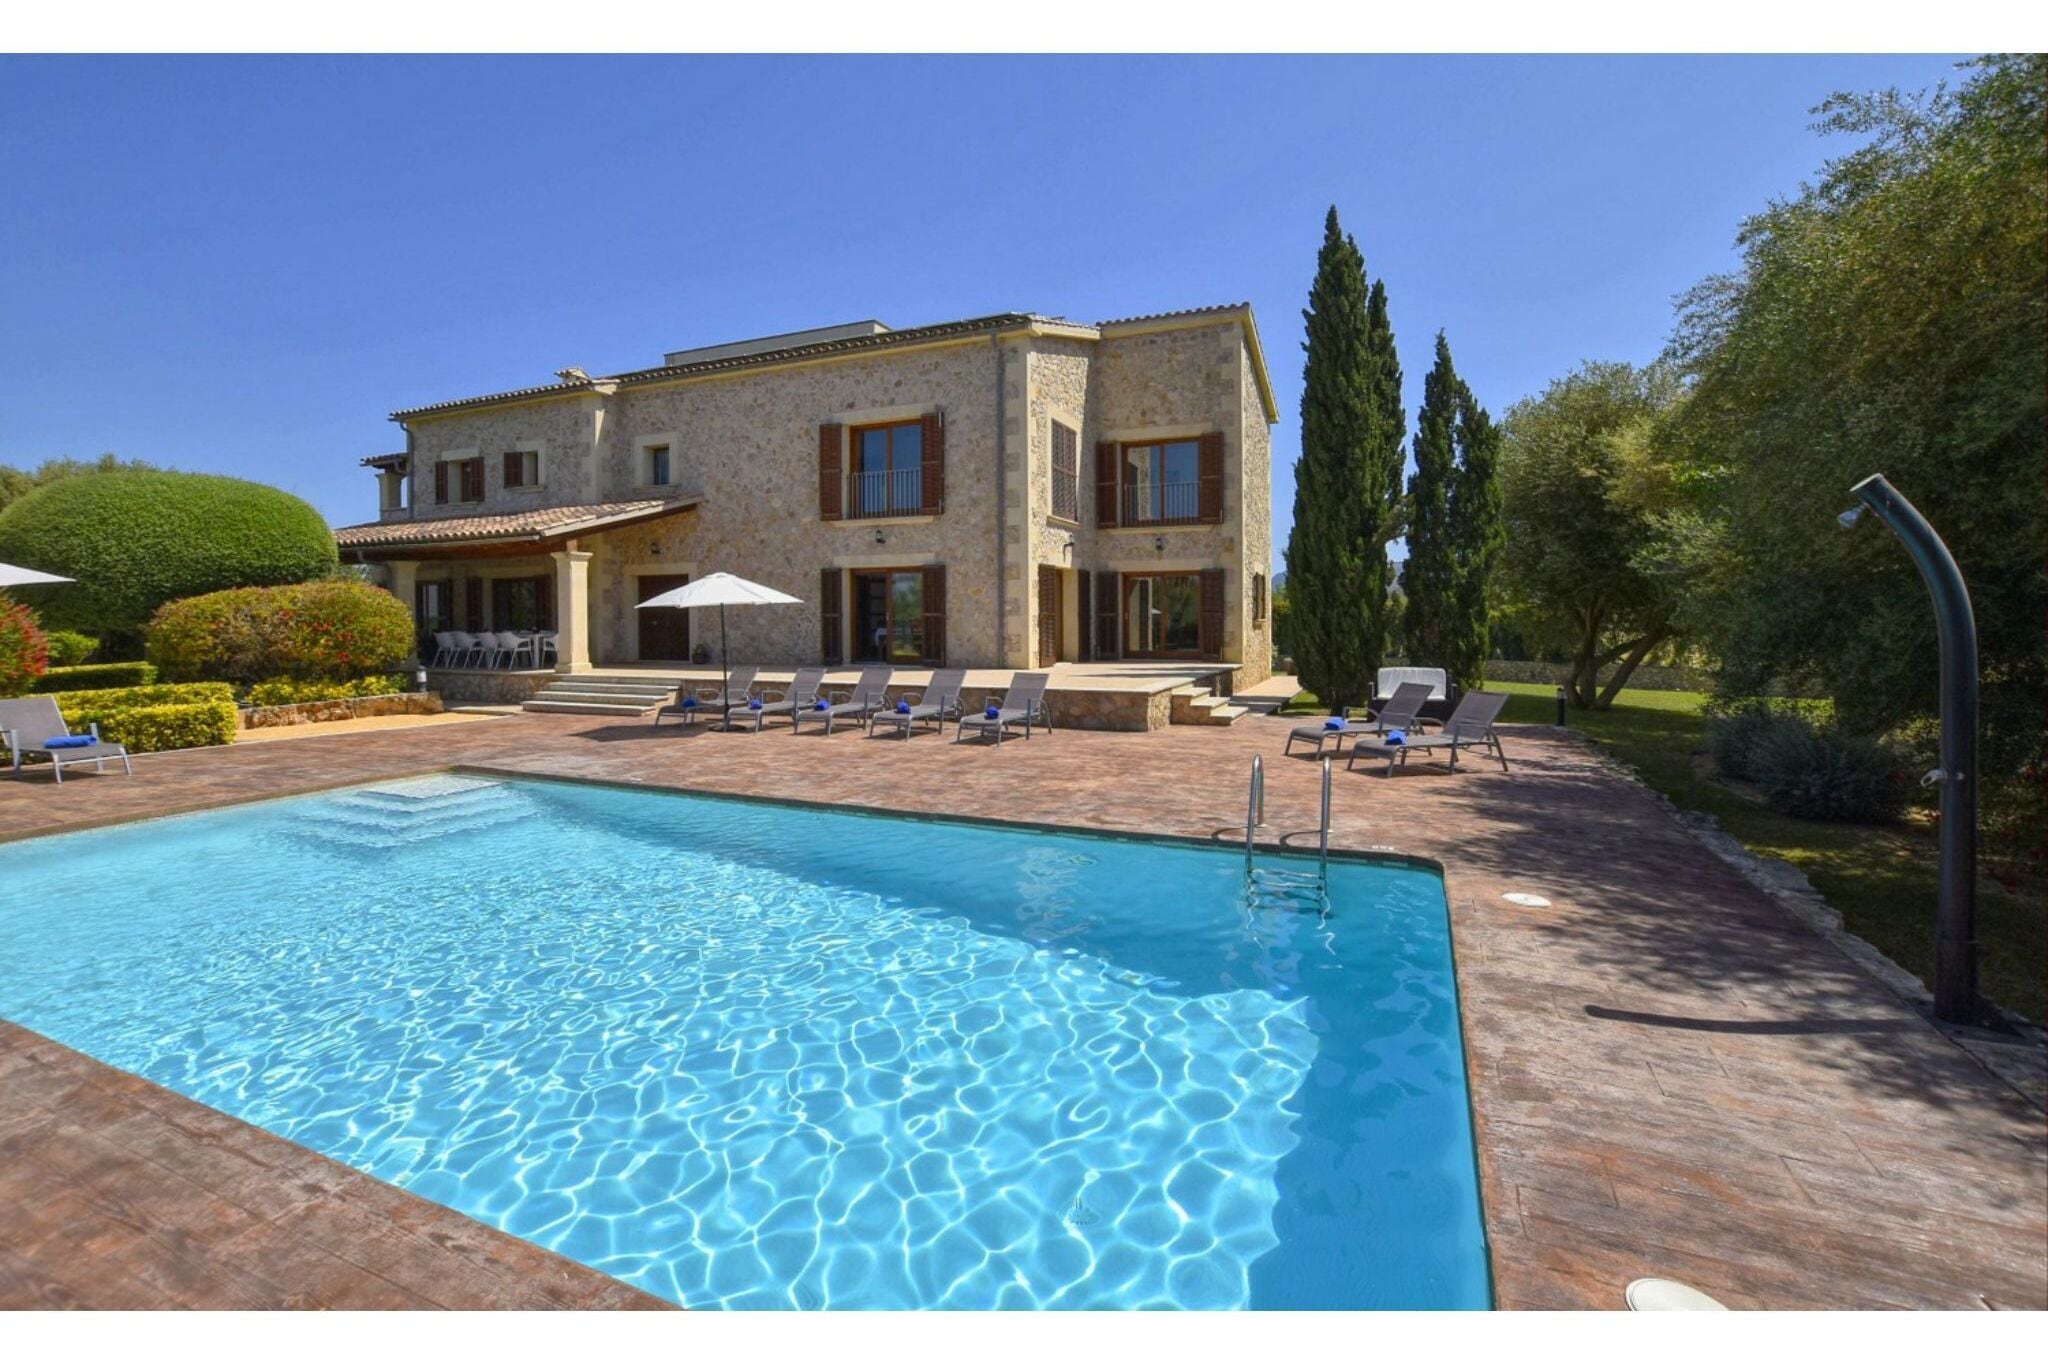 Luxurious country house with pool near the town of Alcudia